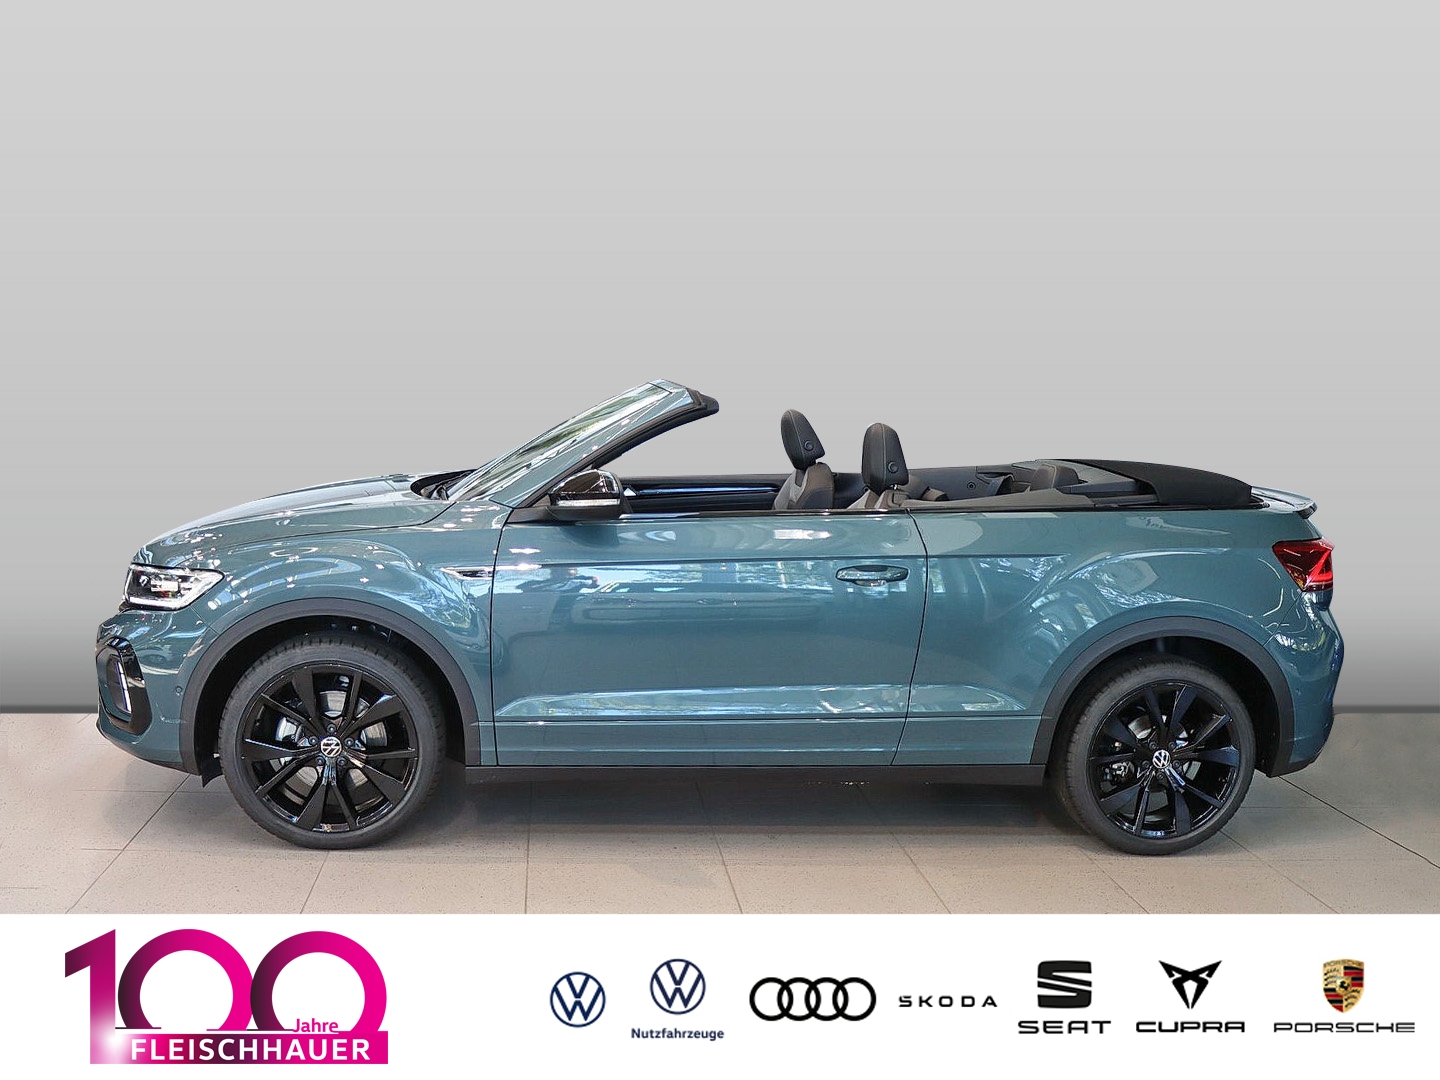 Car Volkswagen T-Roc Cabriolet R-Line 150 PS DSG from Germany, 18403 EUR  for sale - ID: 6477400